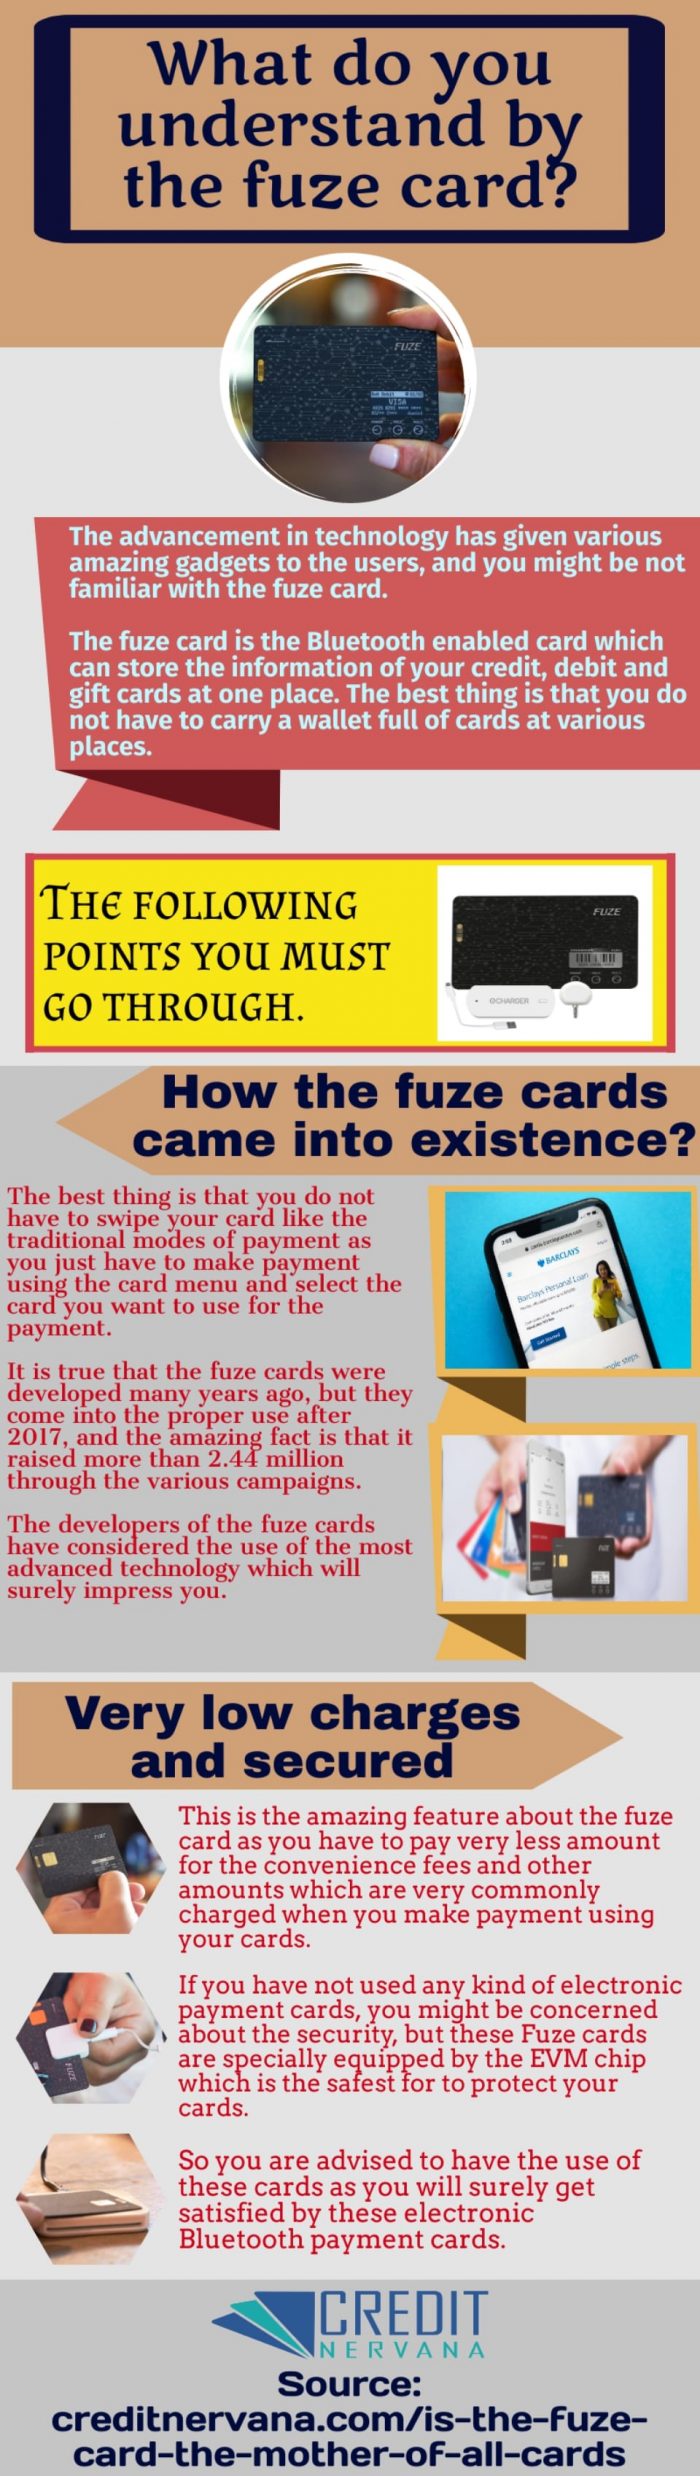 Fuze cards-Easily accessible through the application